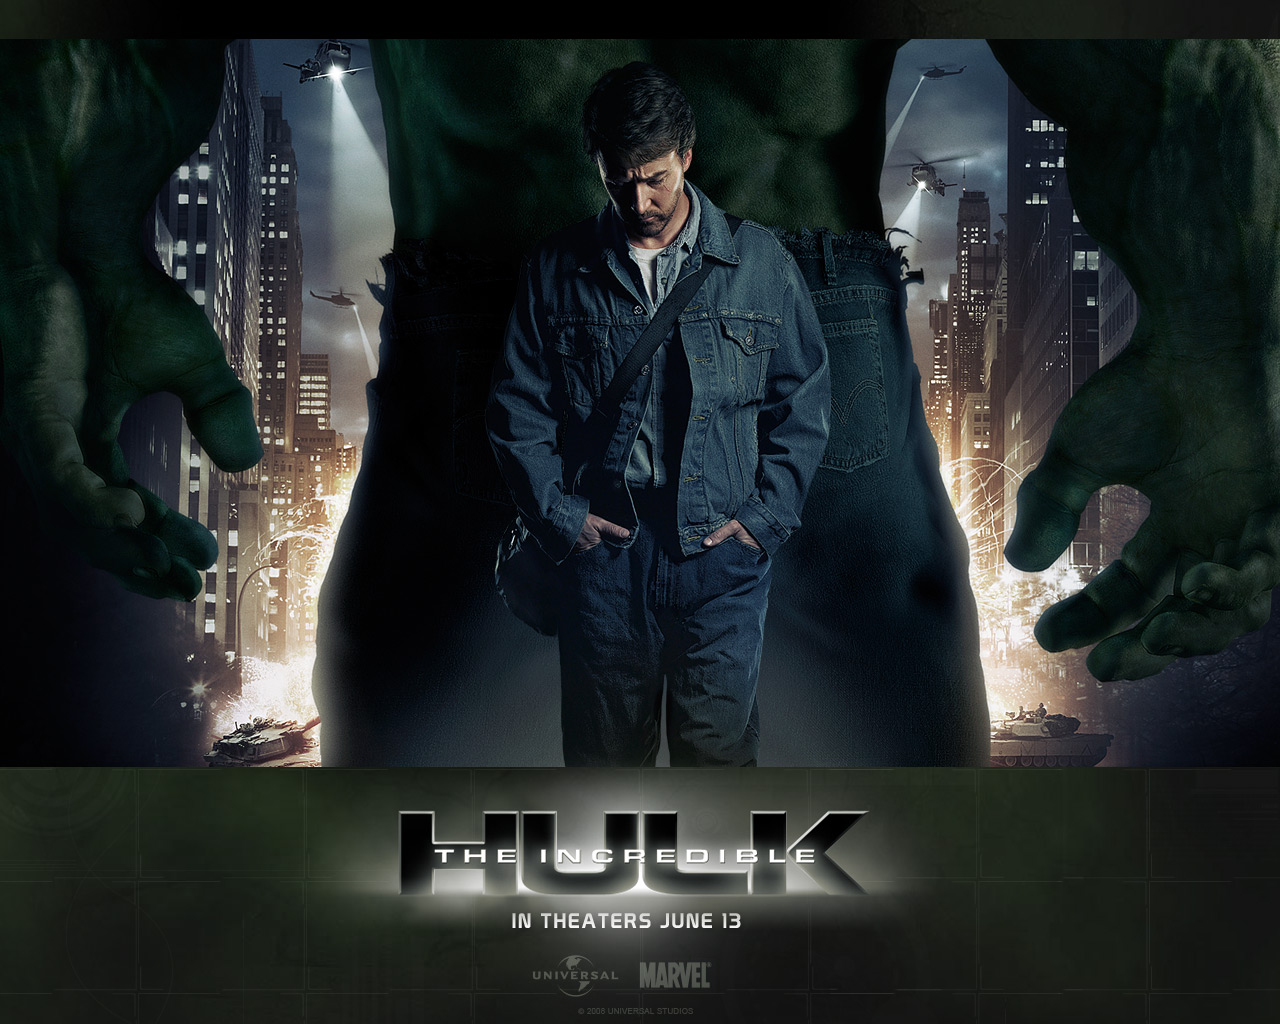 Download High quality The Incredible Hulk wallpaper / Movies / 1280x1024